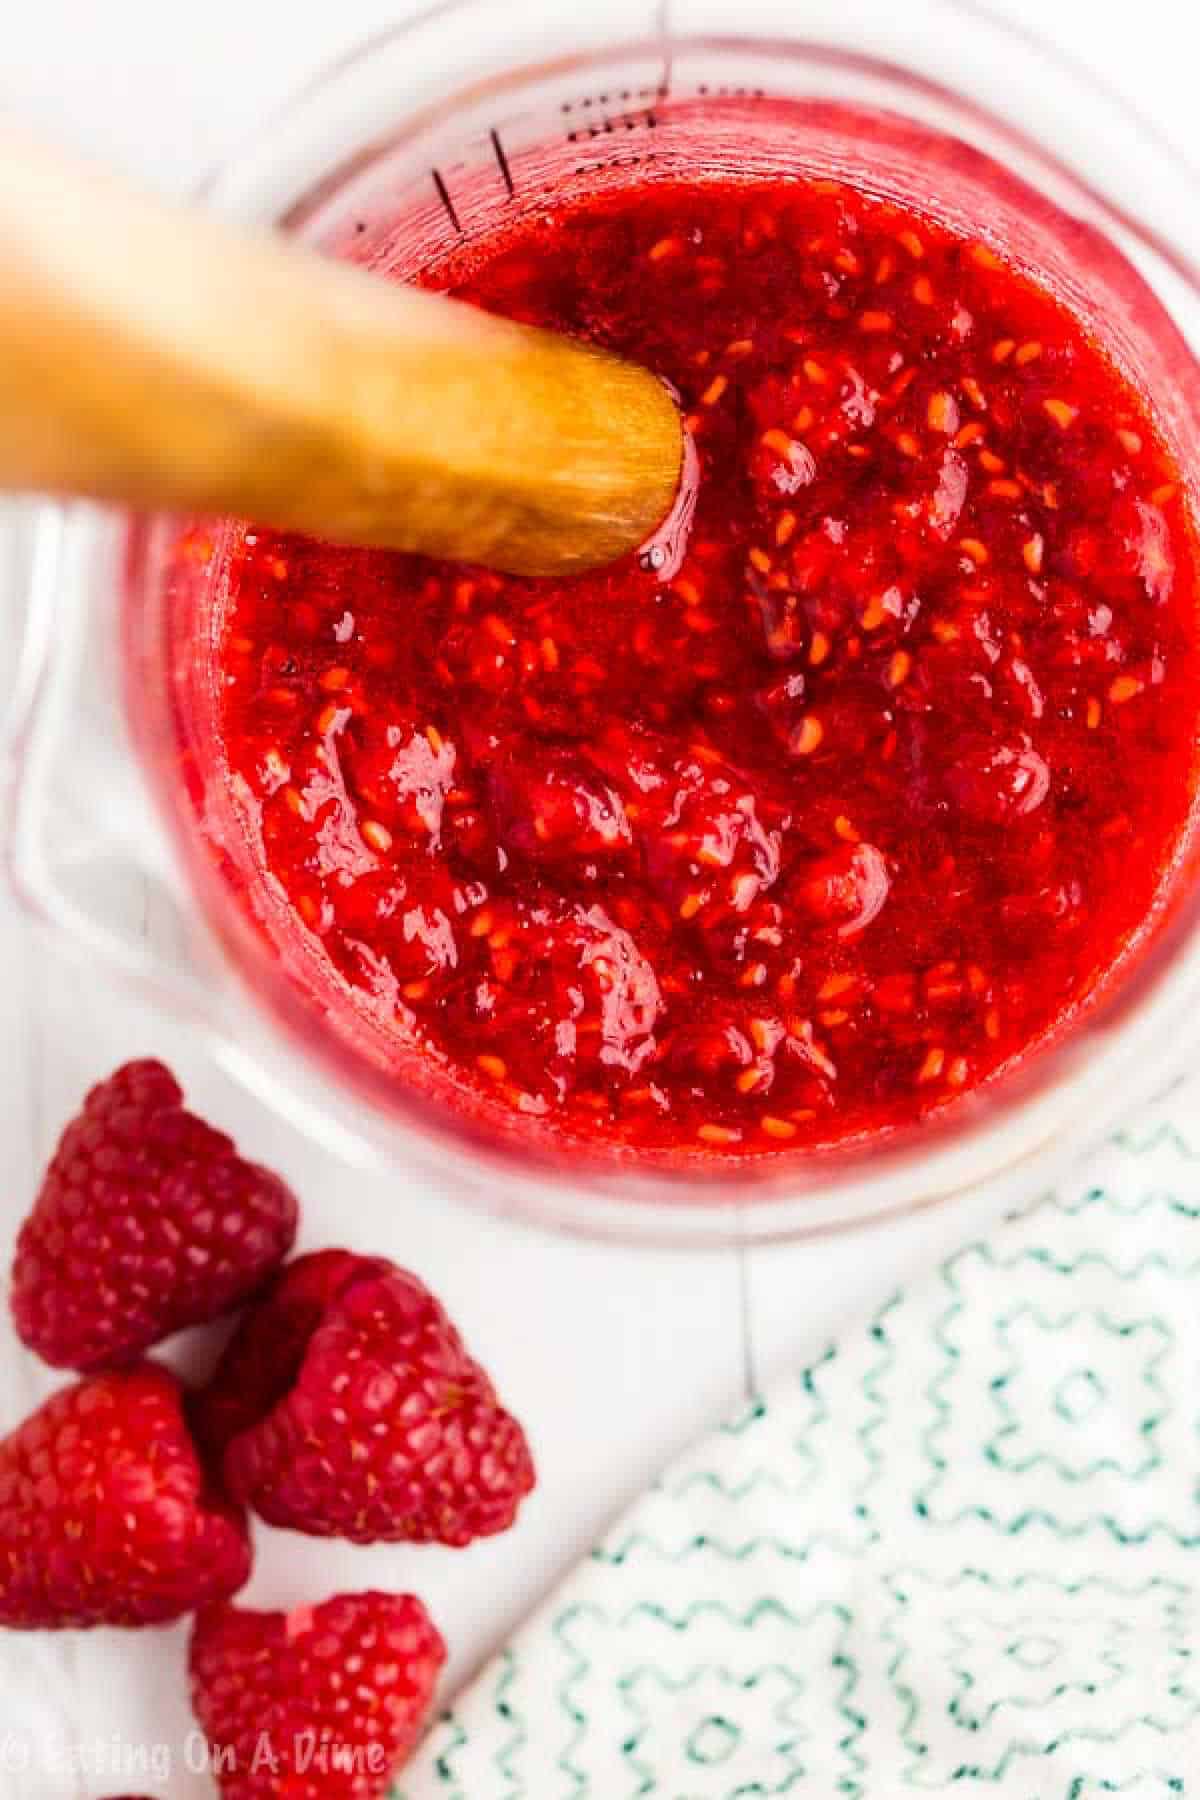 Mashing raspberries in a measuring cup